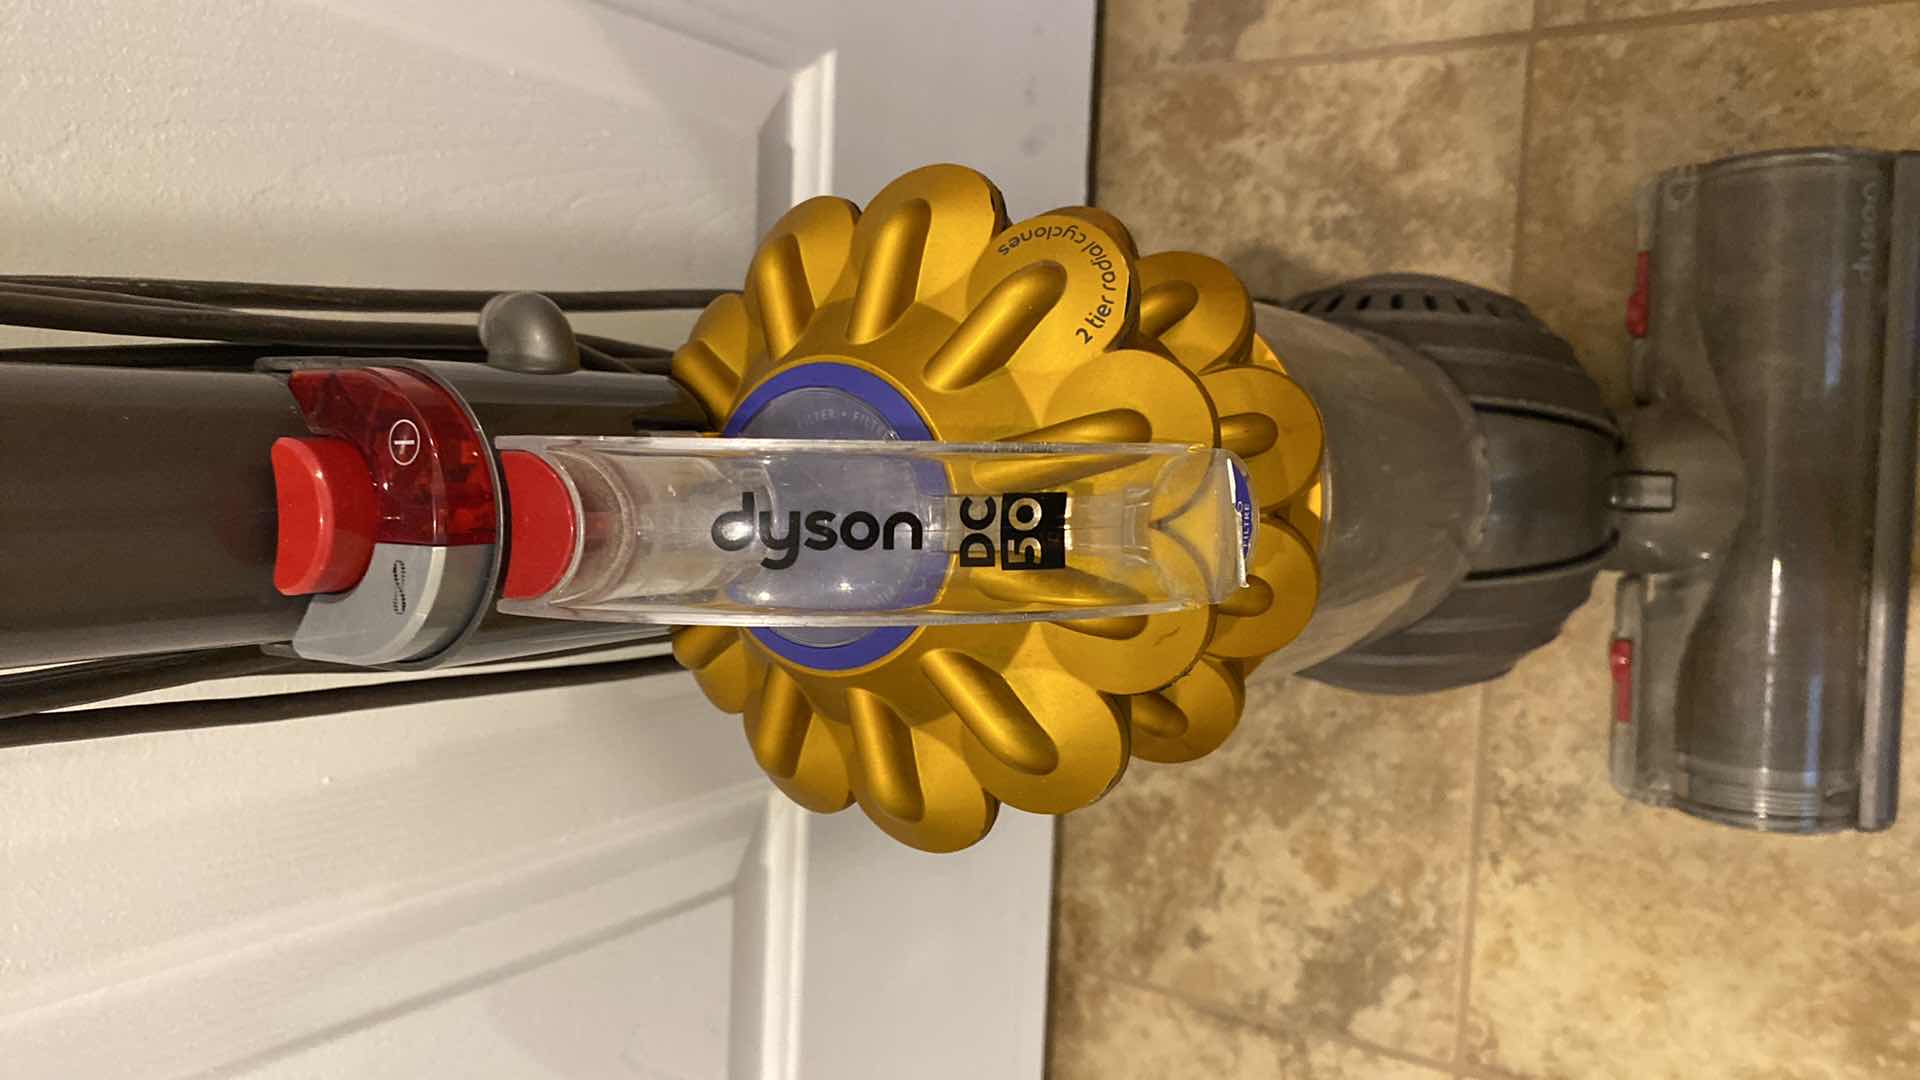 Photo 2 of DYSON VACUUM CLEANER TESTED